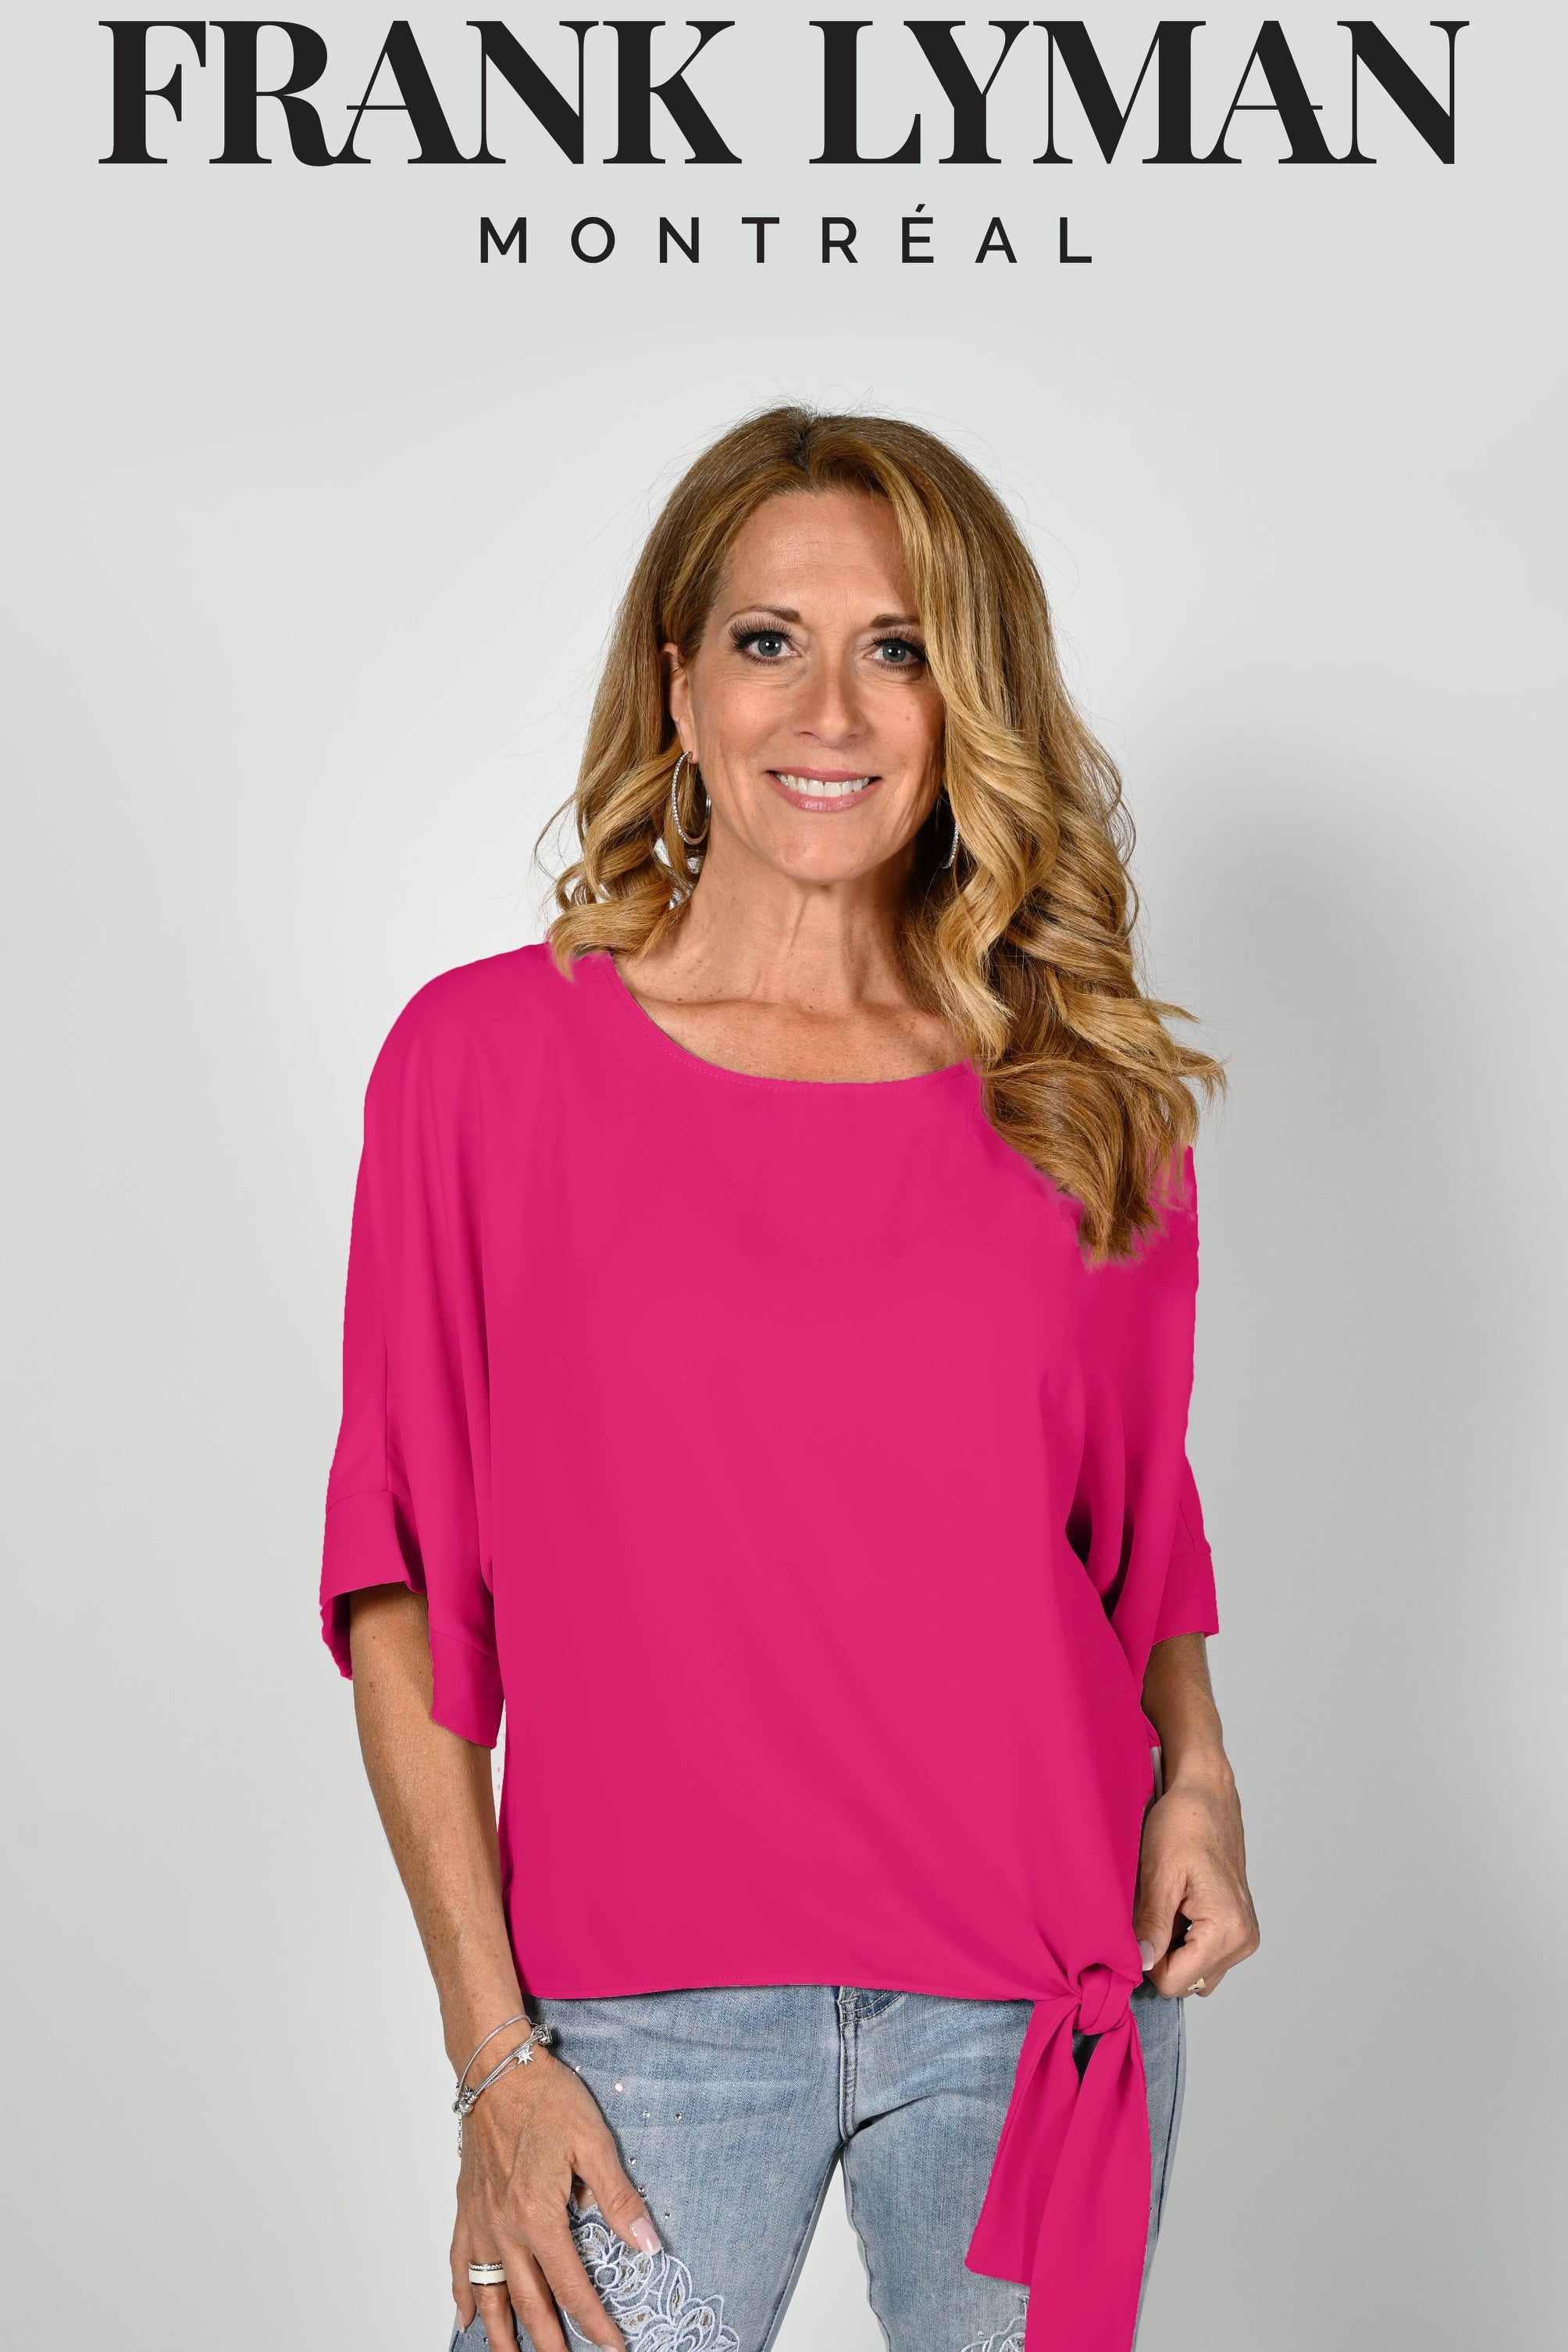 Frank Lyman Montreal Spring 2023 Collection-Frank Lyman Montreal Tops-Buy Frank Lyman Montreal Clothing Online-Frank Lyman Montreal Online Shop